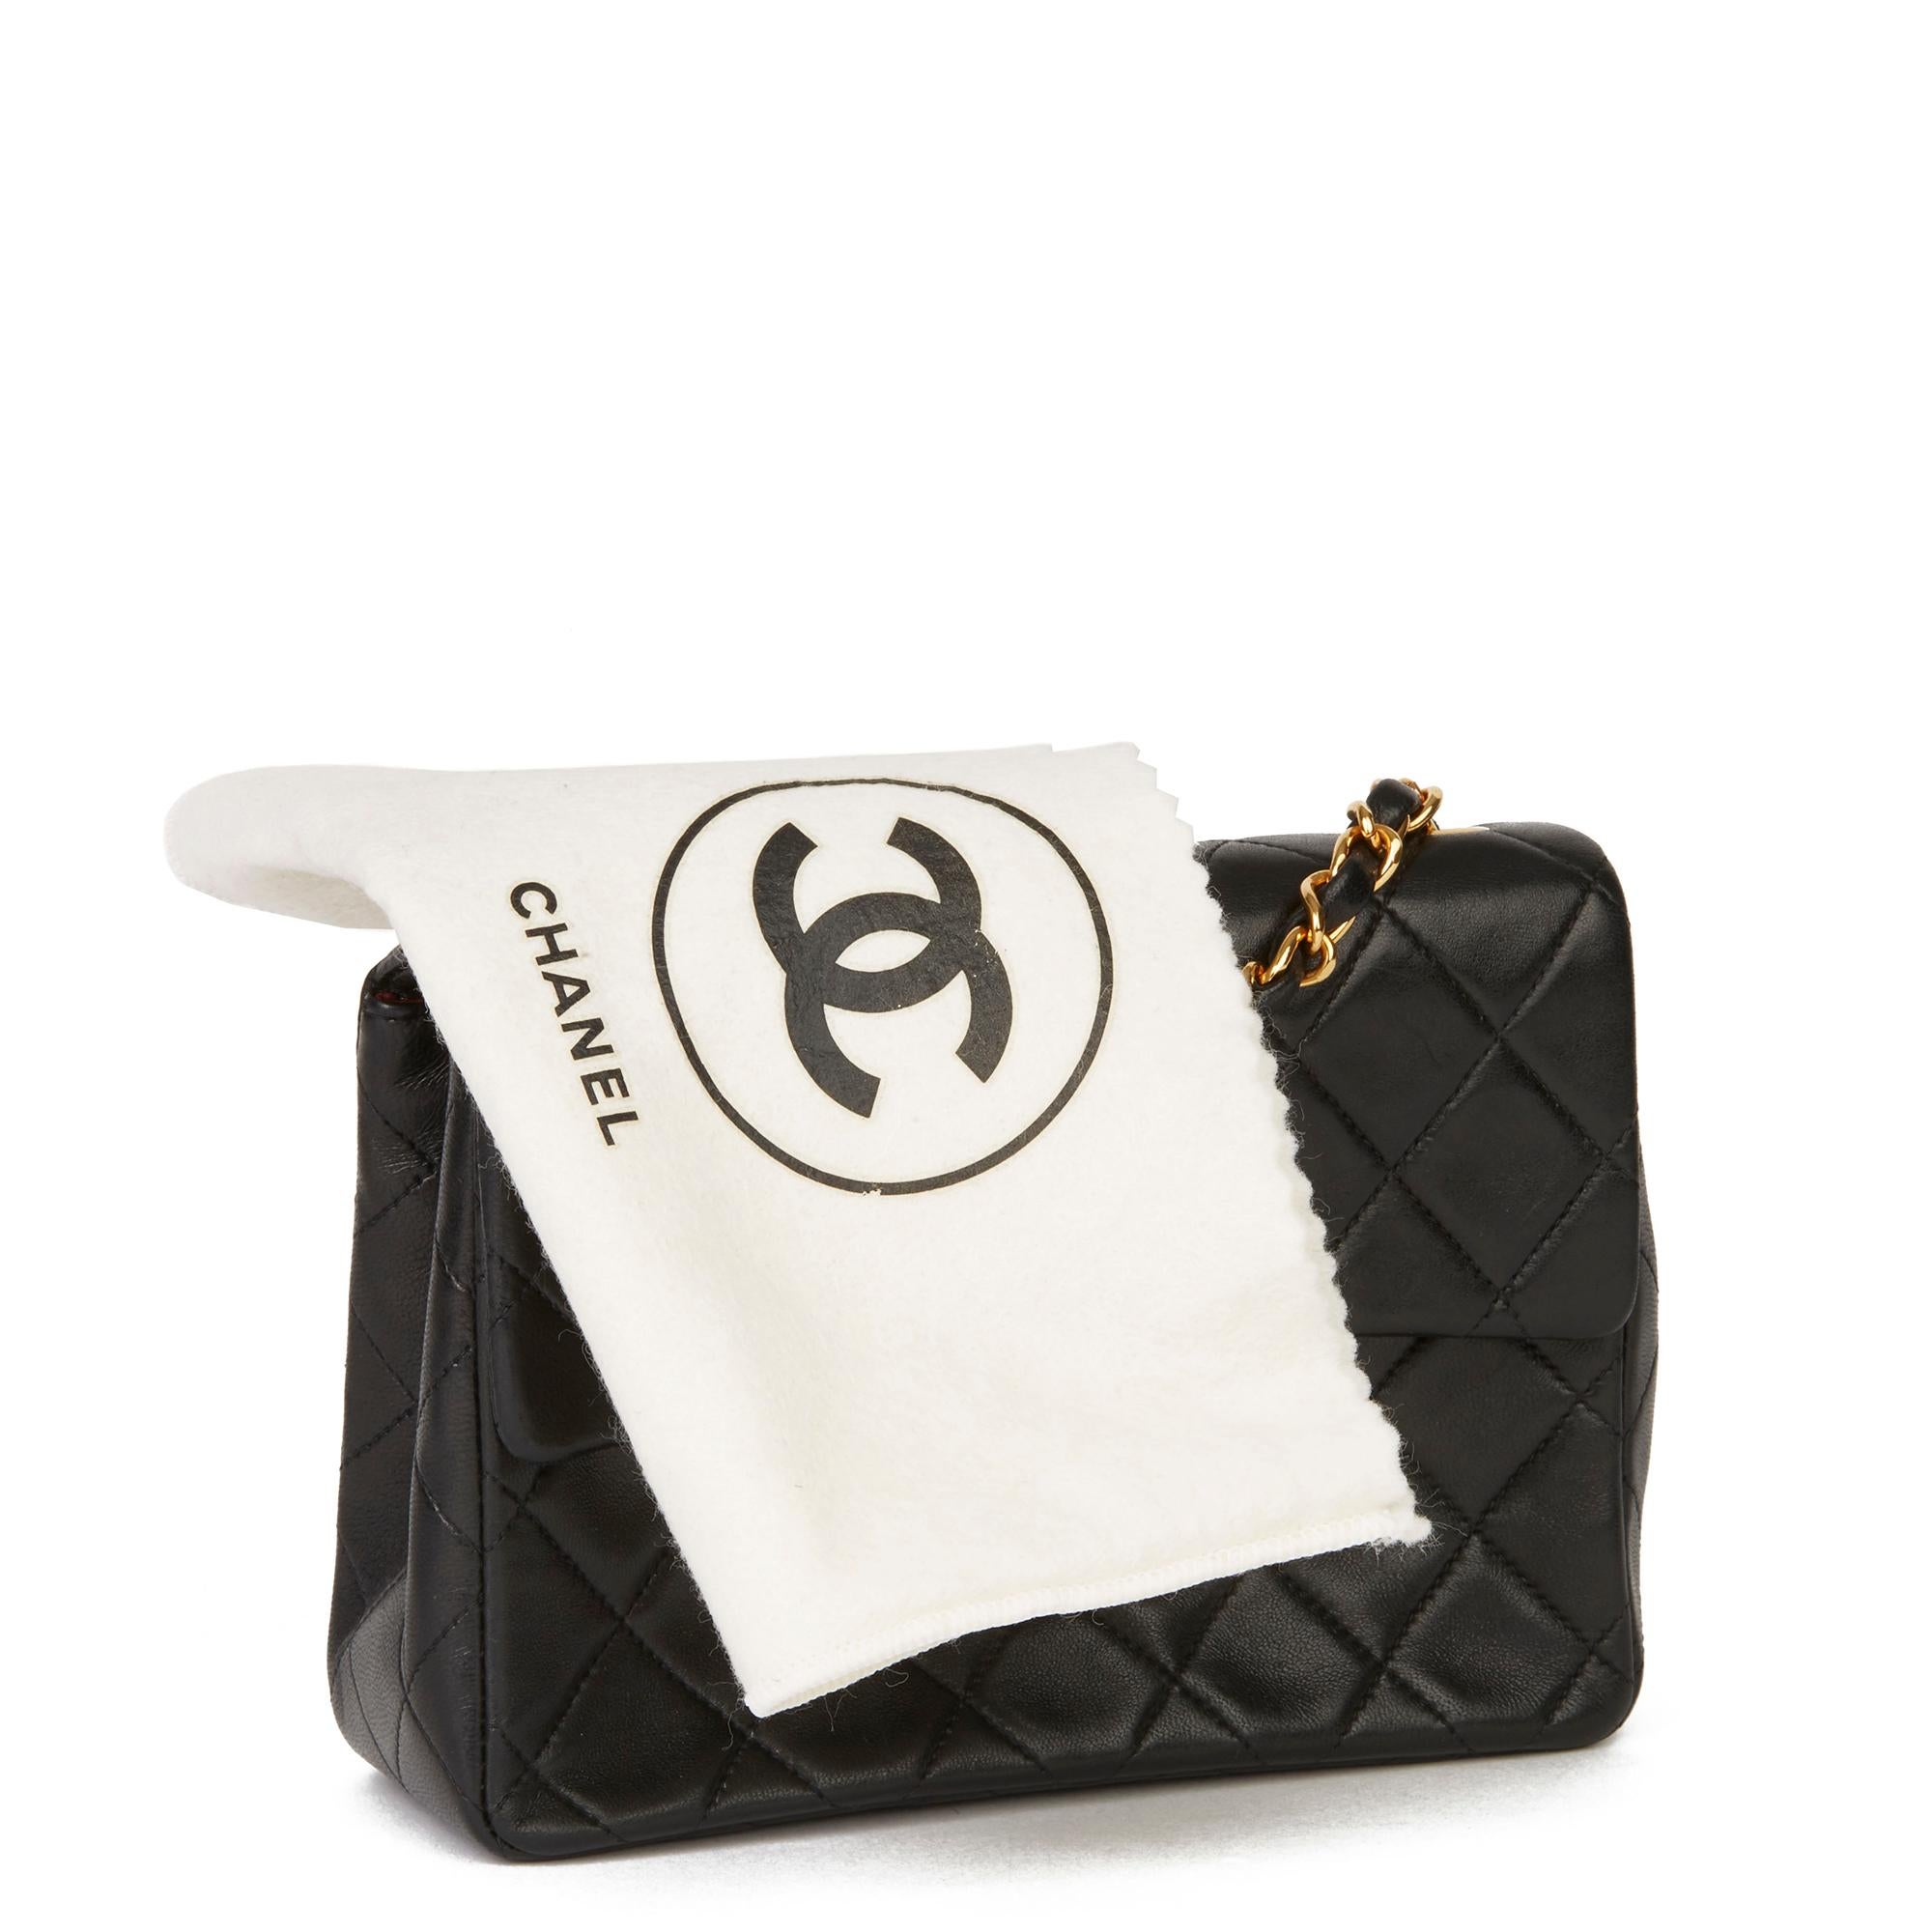 1994 Chanel Black Quilted Lambskin Vintage Mini Flap Bag 6